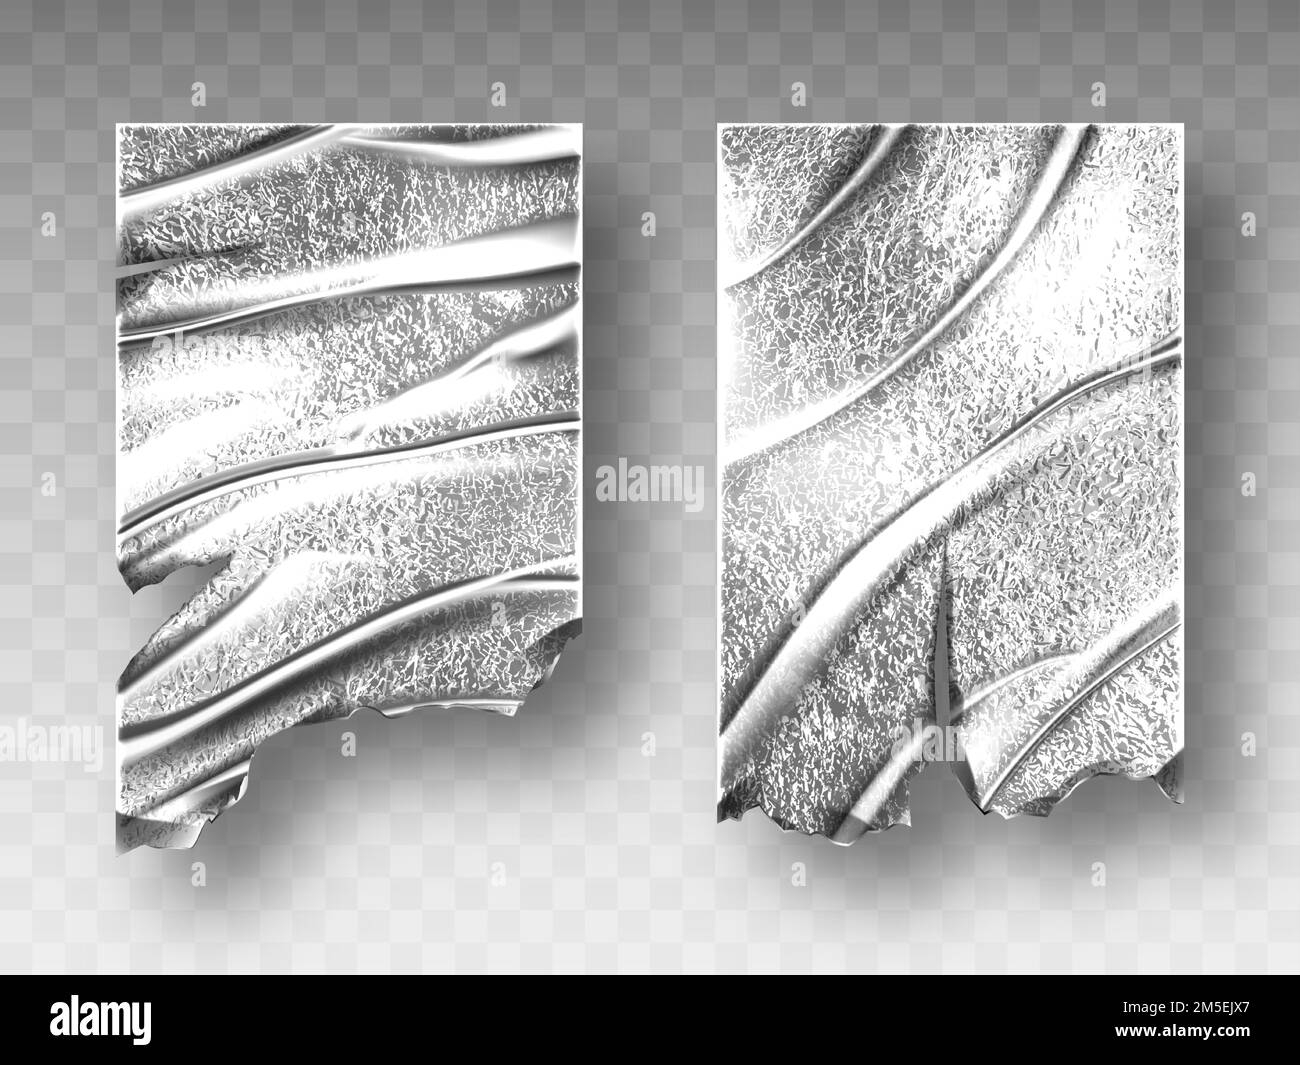 Silver foil, crumpled metal texture with ragged edge isolated on transparent background, aluminum or steel folded curtain, wrapping paper sheets, wrinkled shiny material, Realistic 3d vector tinfoil Stock Vector